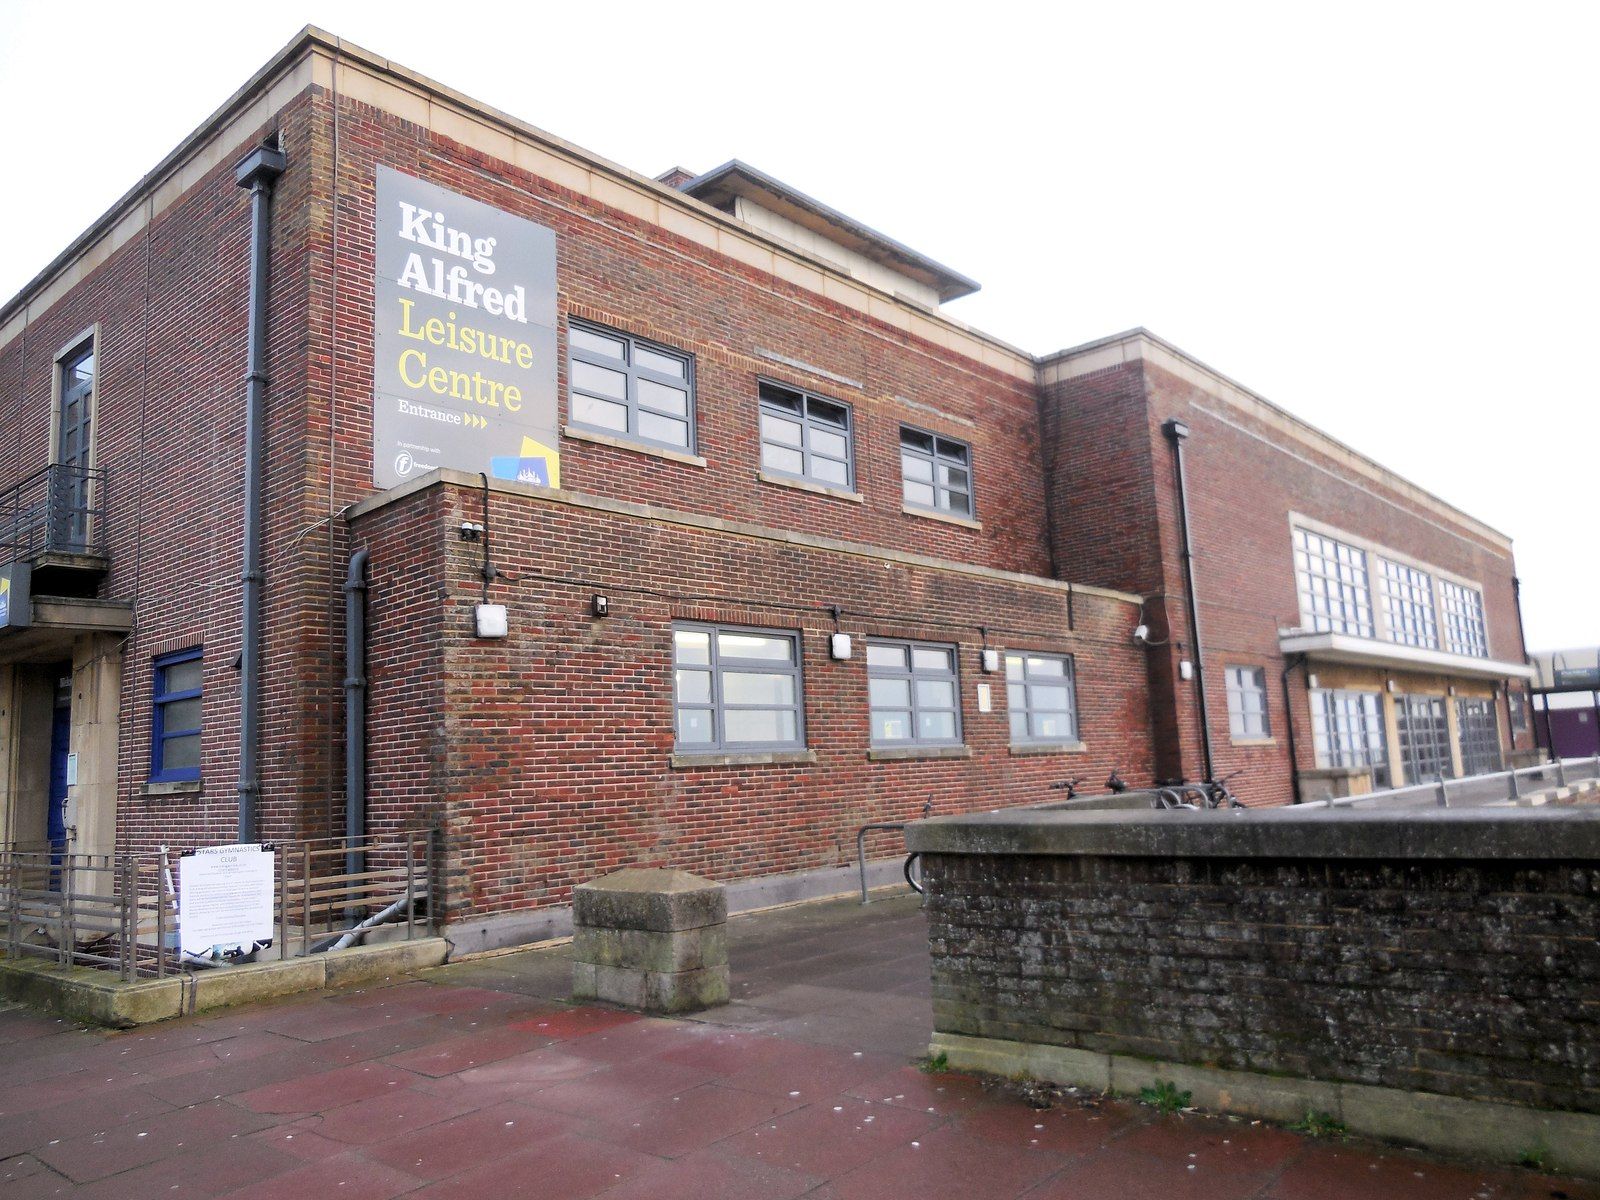 Picture of the King Alfred Leisure Centre